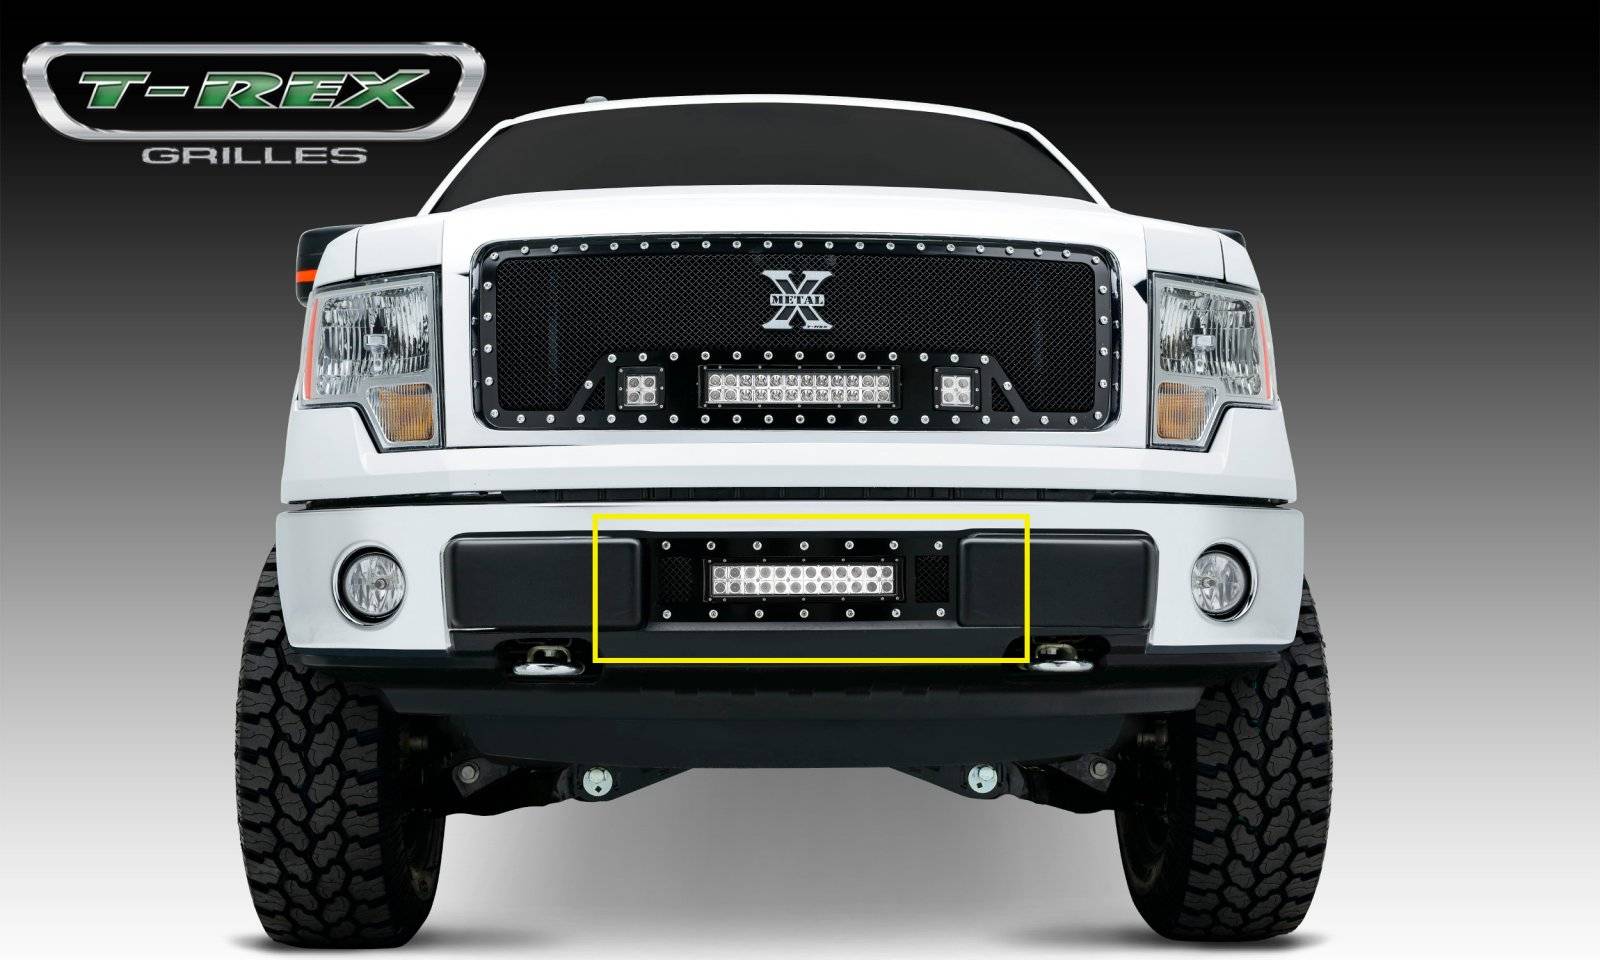 T-REX GRILLES - 2009-2014 Ford F-150 Torch Bumper Grille, Black, 1 Pc, Bolt-On, Chrome Studs with (1) 12" LED - Part # 6325681